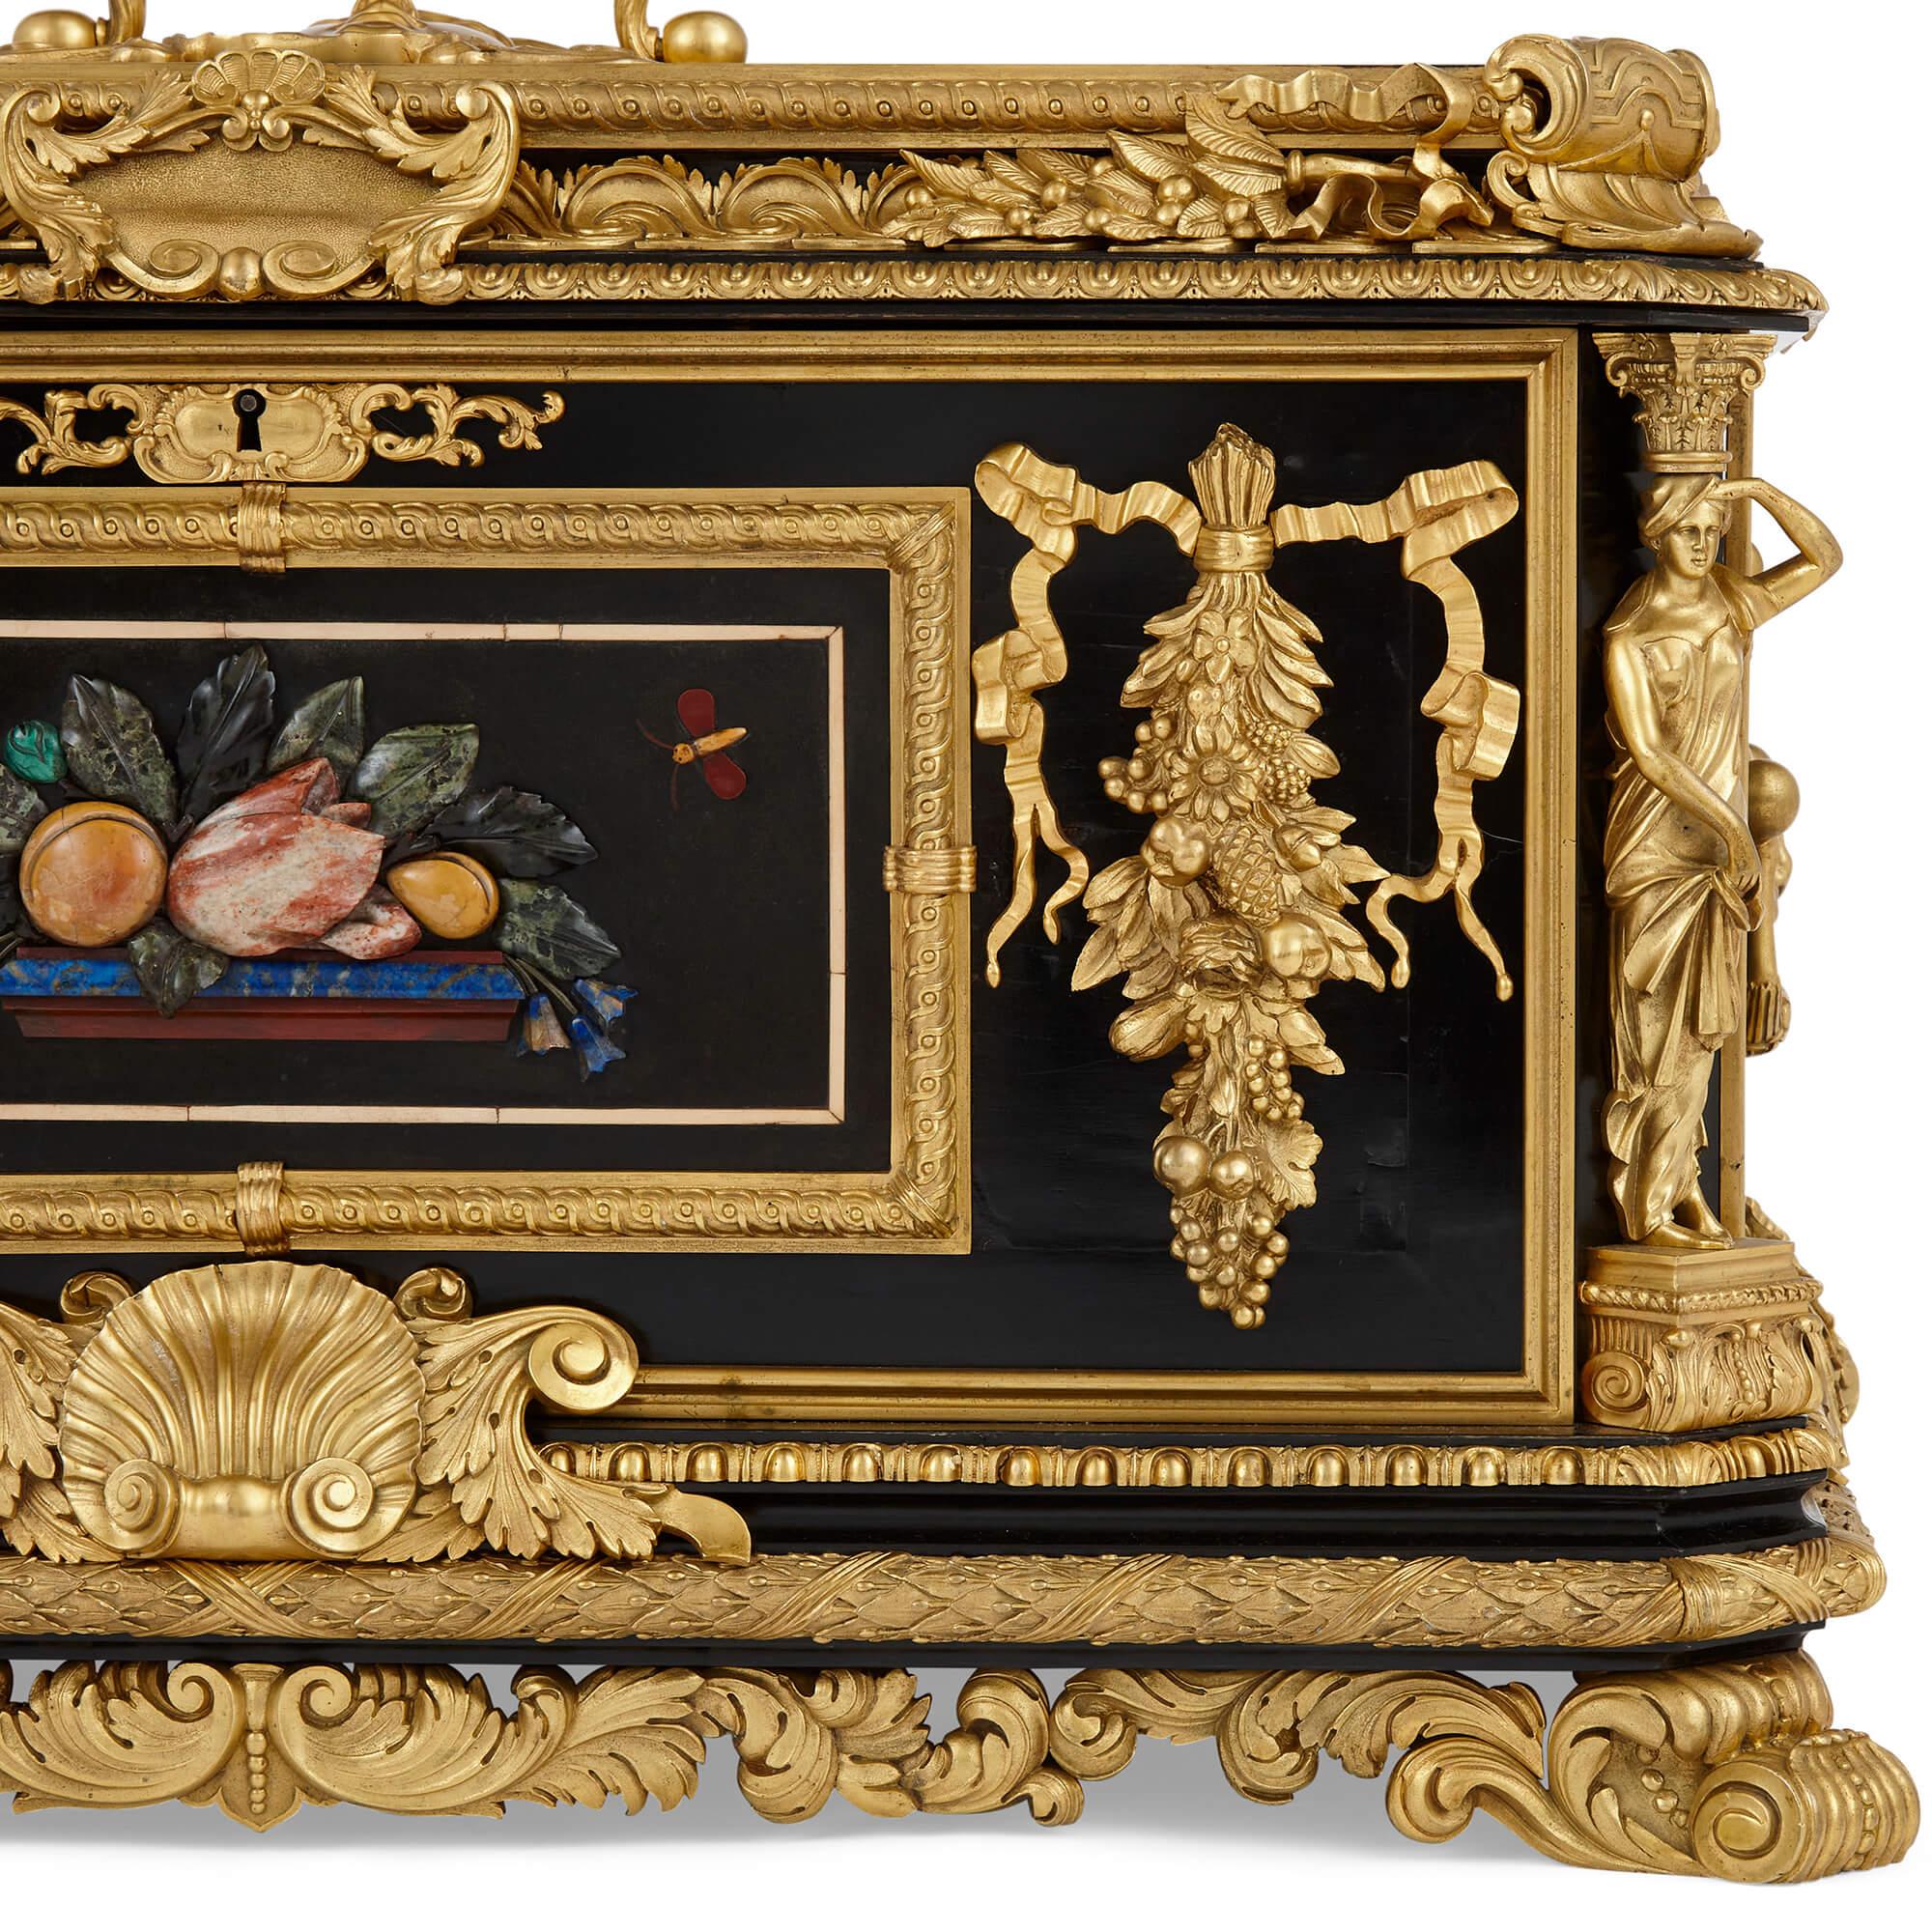 Ormolu Magnificent and large ormolu and hardstone Regency period ebonized wooden casket For Sale